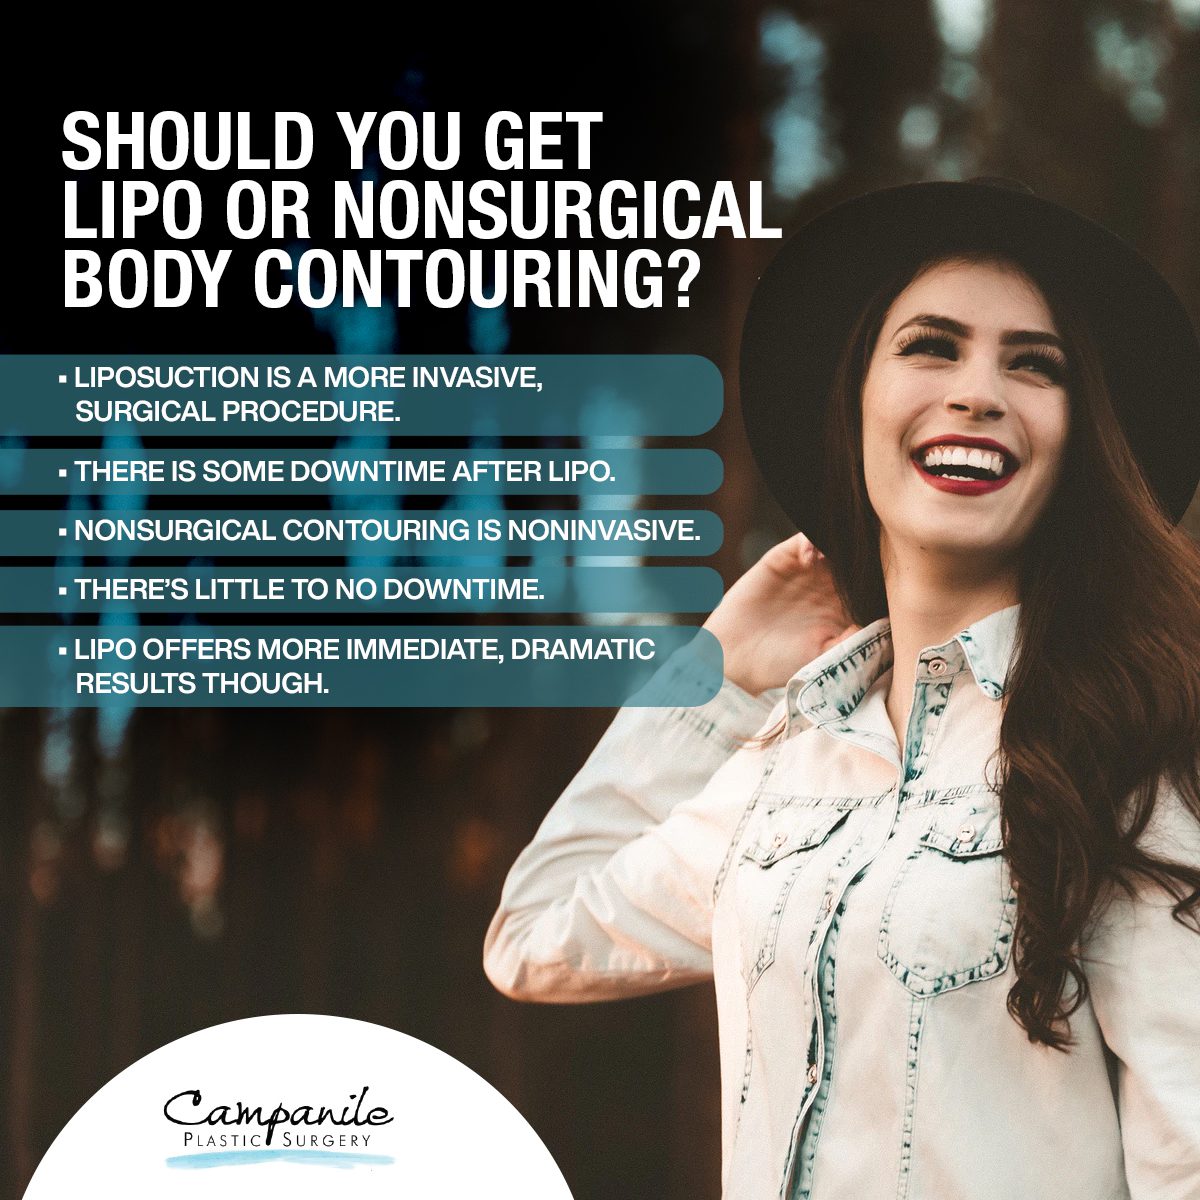 Should You Get Lipo Or Nonsurgiucal Body Contouring? [Infographic]